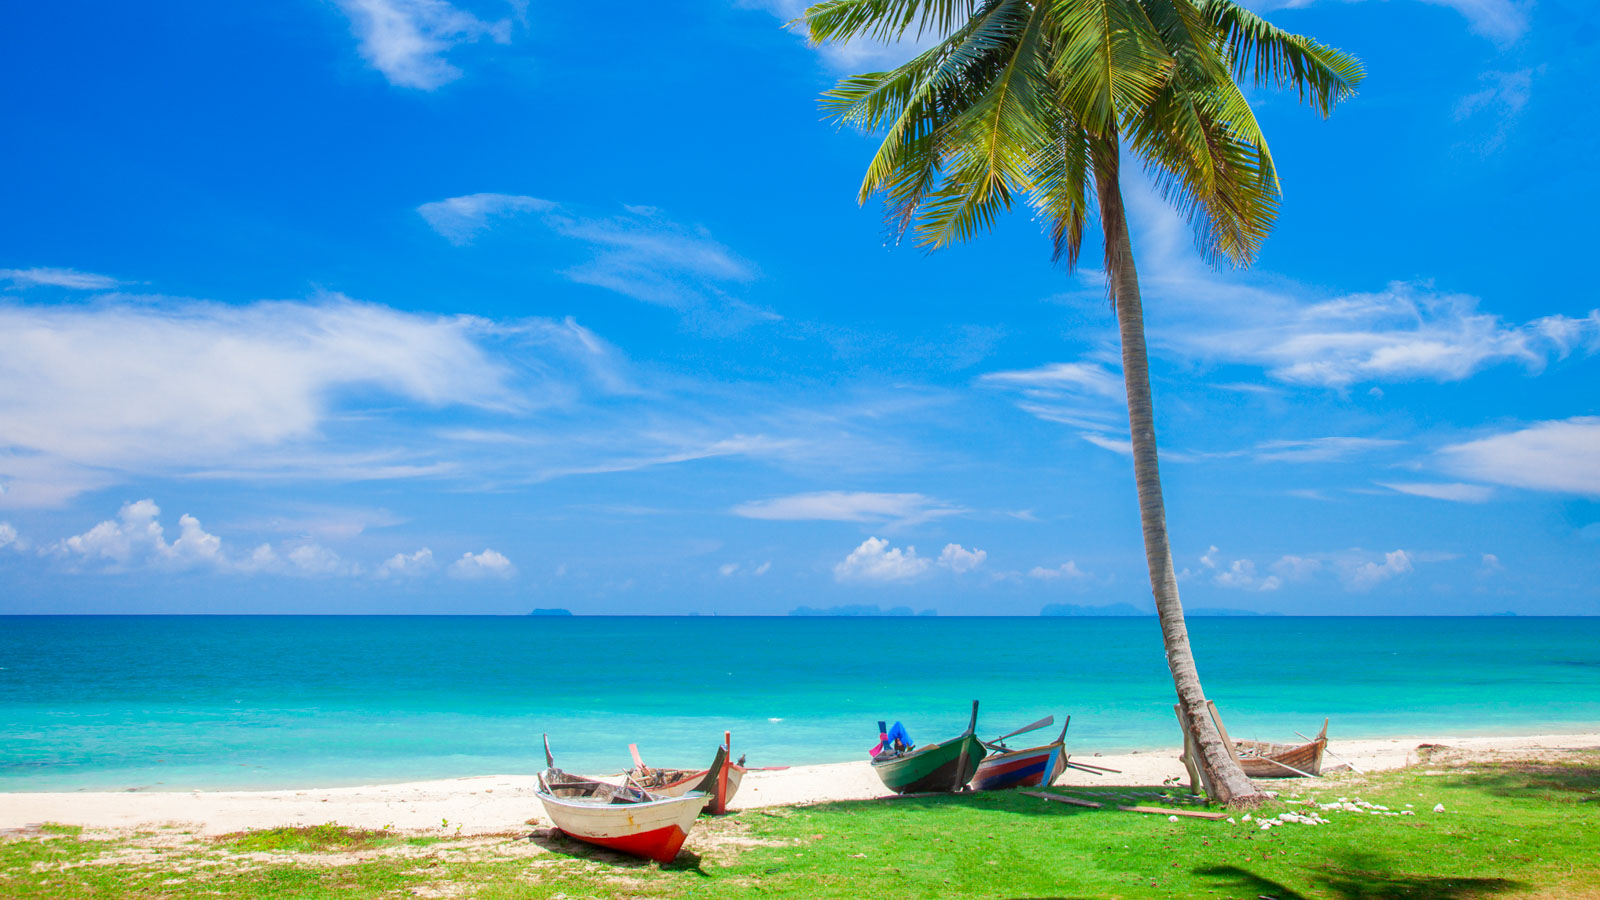 Boats on beach in Thailand with clear blue water